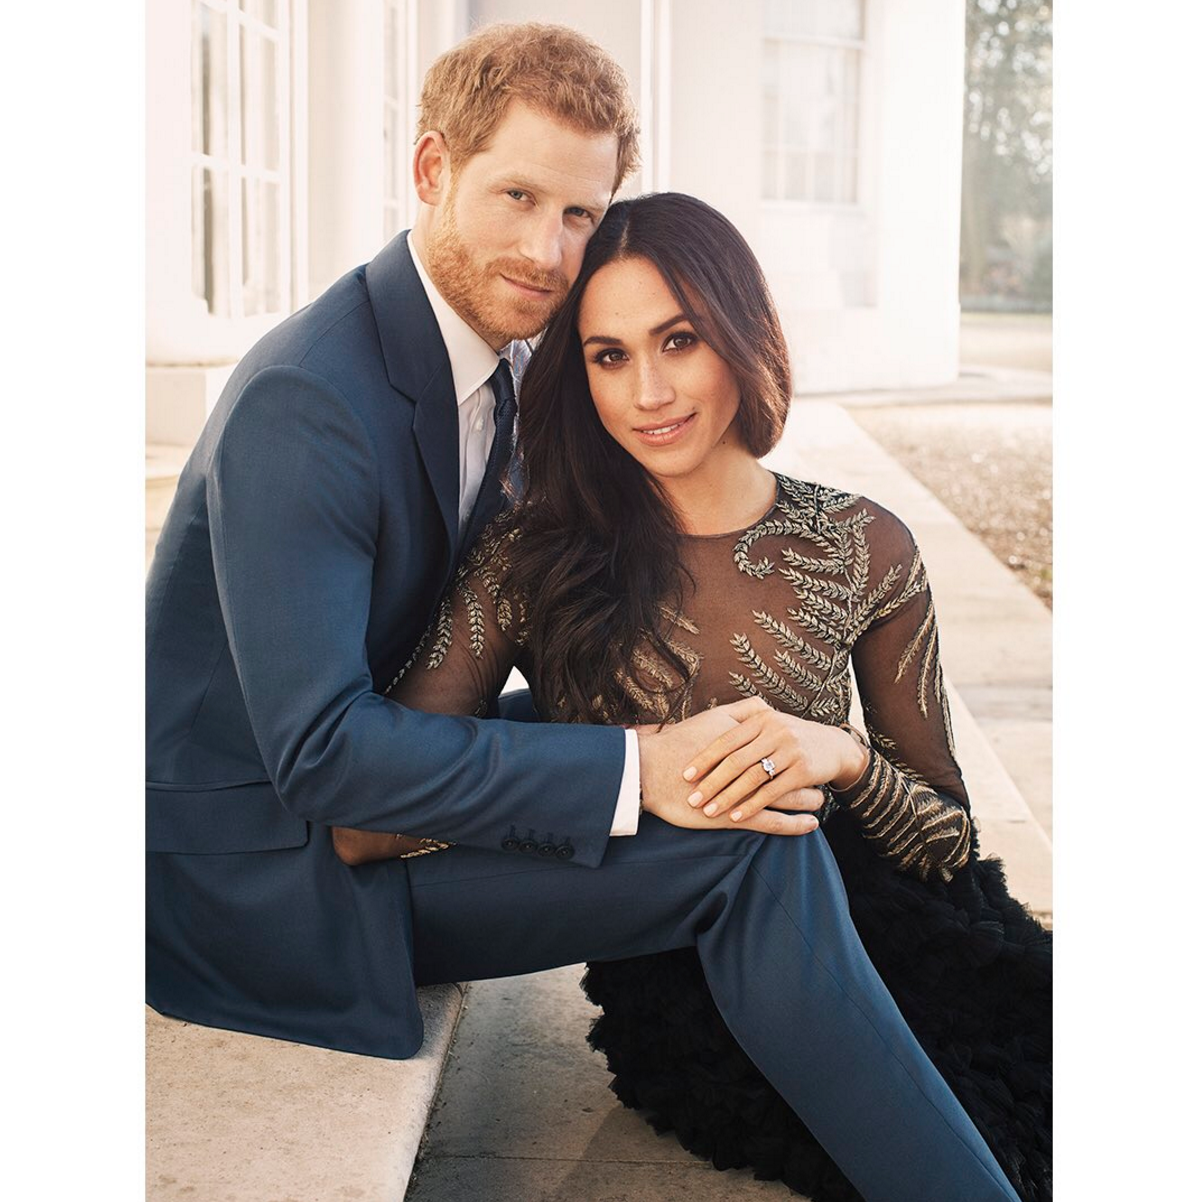 The Look of Love! See Prince Harry and Meghan Markle's Stunning Official Engagement Photos